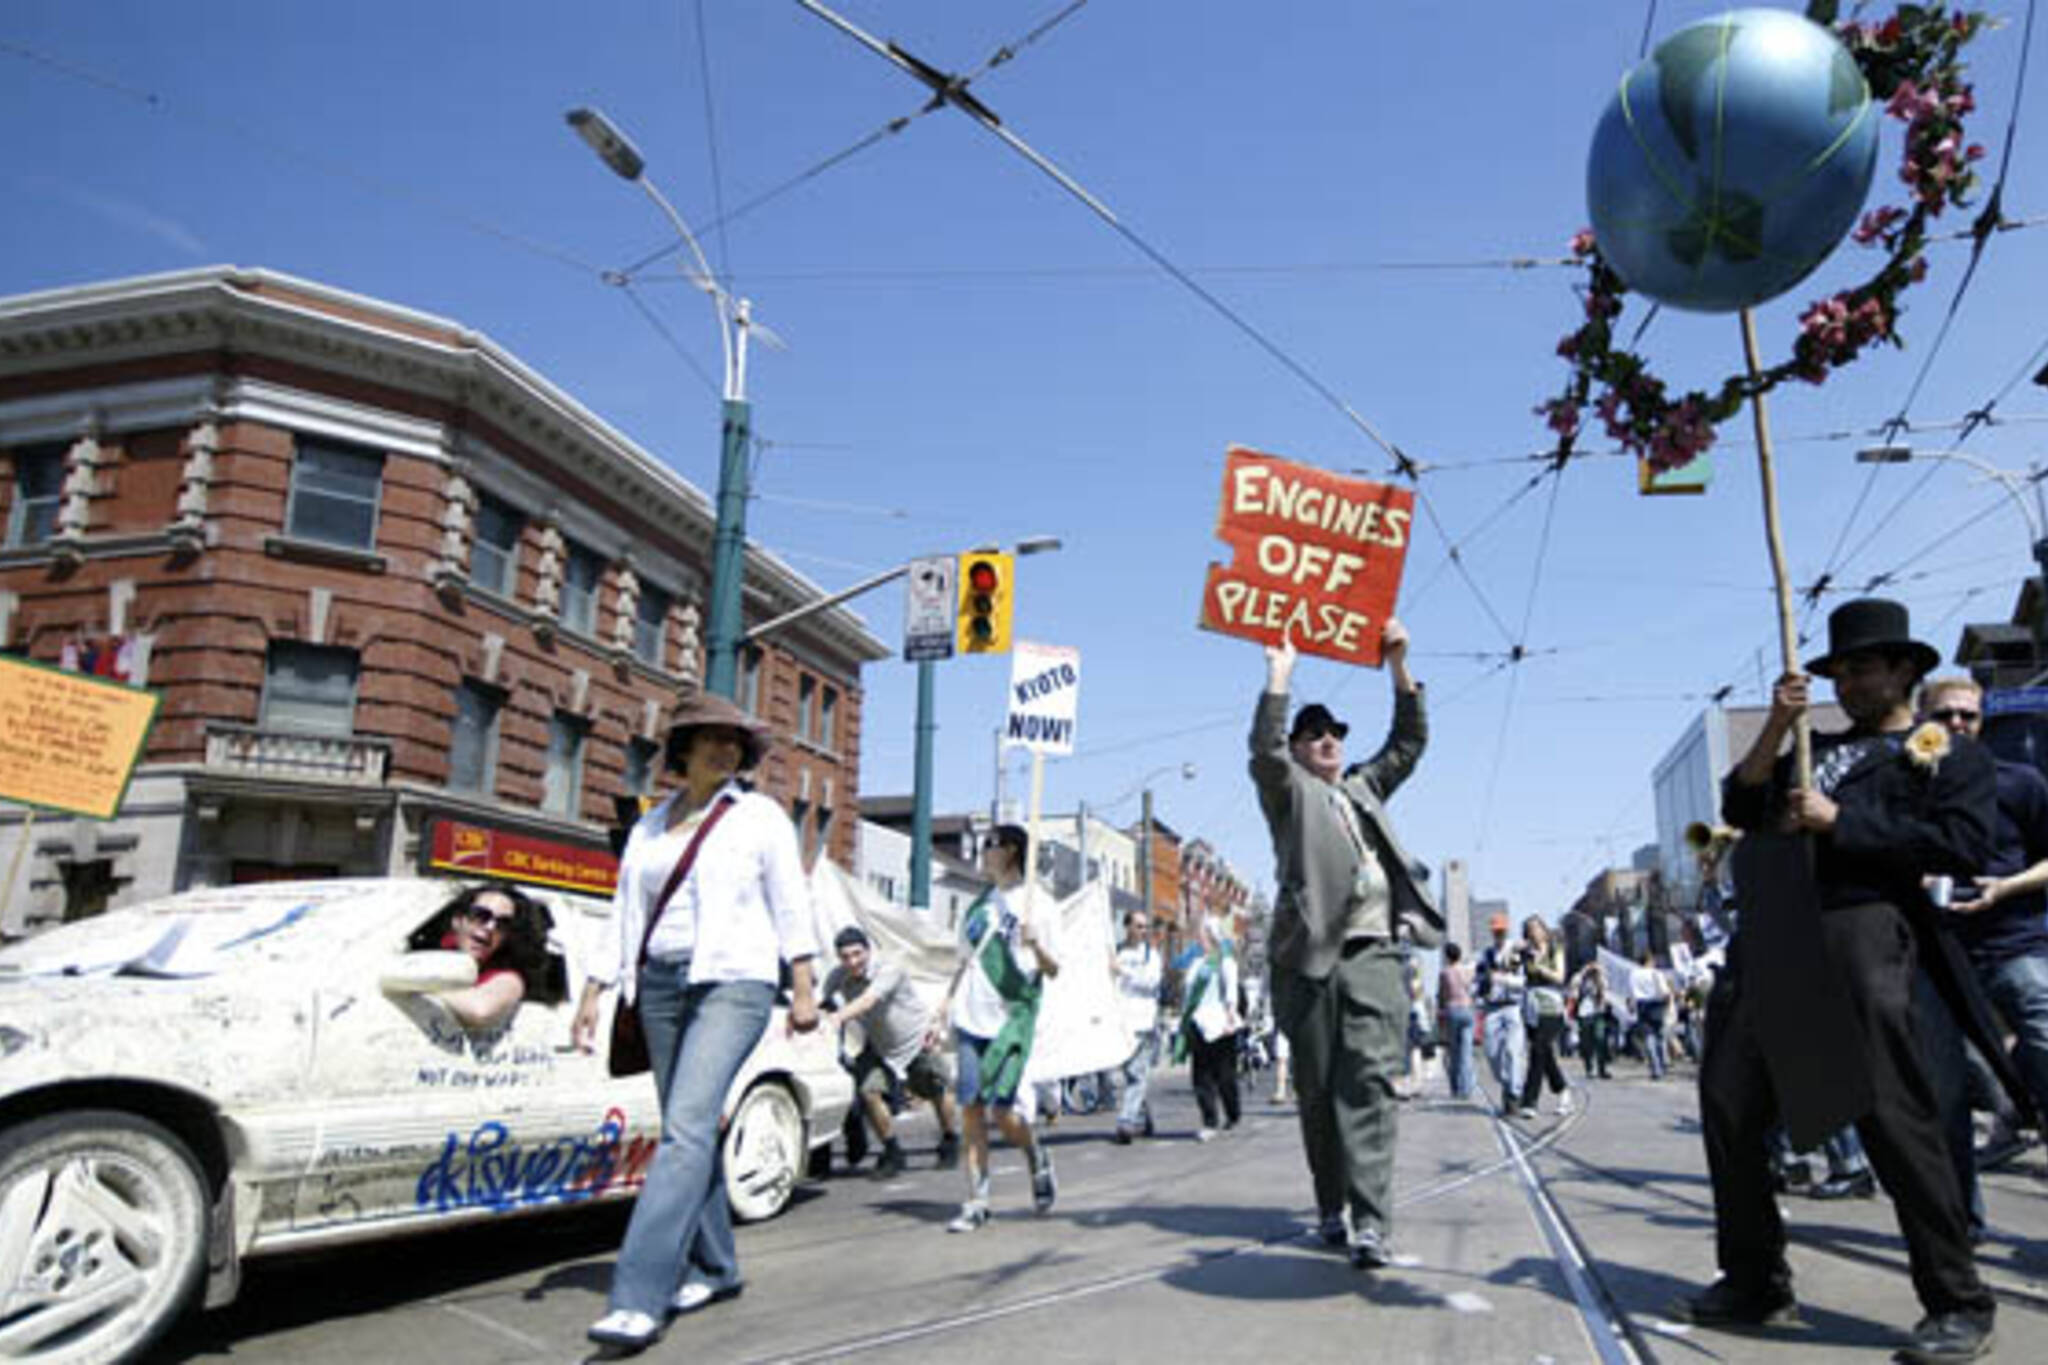 Streets Are For People! celebrate Earth Day in the Queen St. W. and Spadina intersection in Toronto